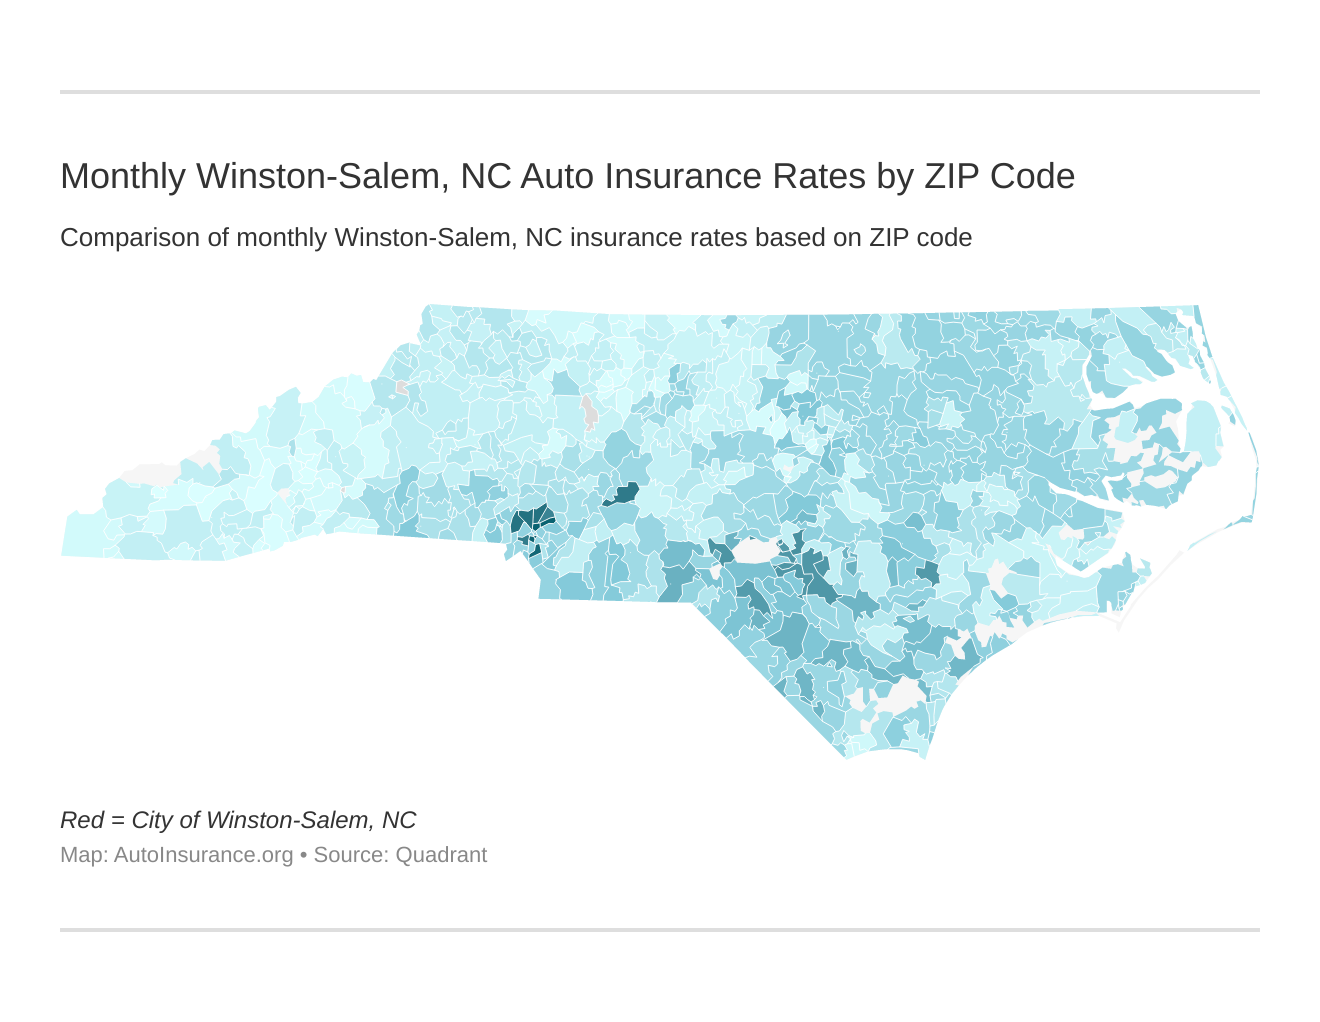 Monthly Winston-Salem, NC Auto Insurance Rates by ZIP Code